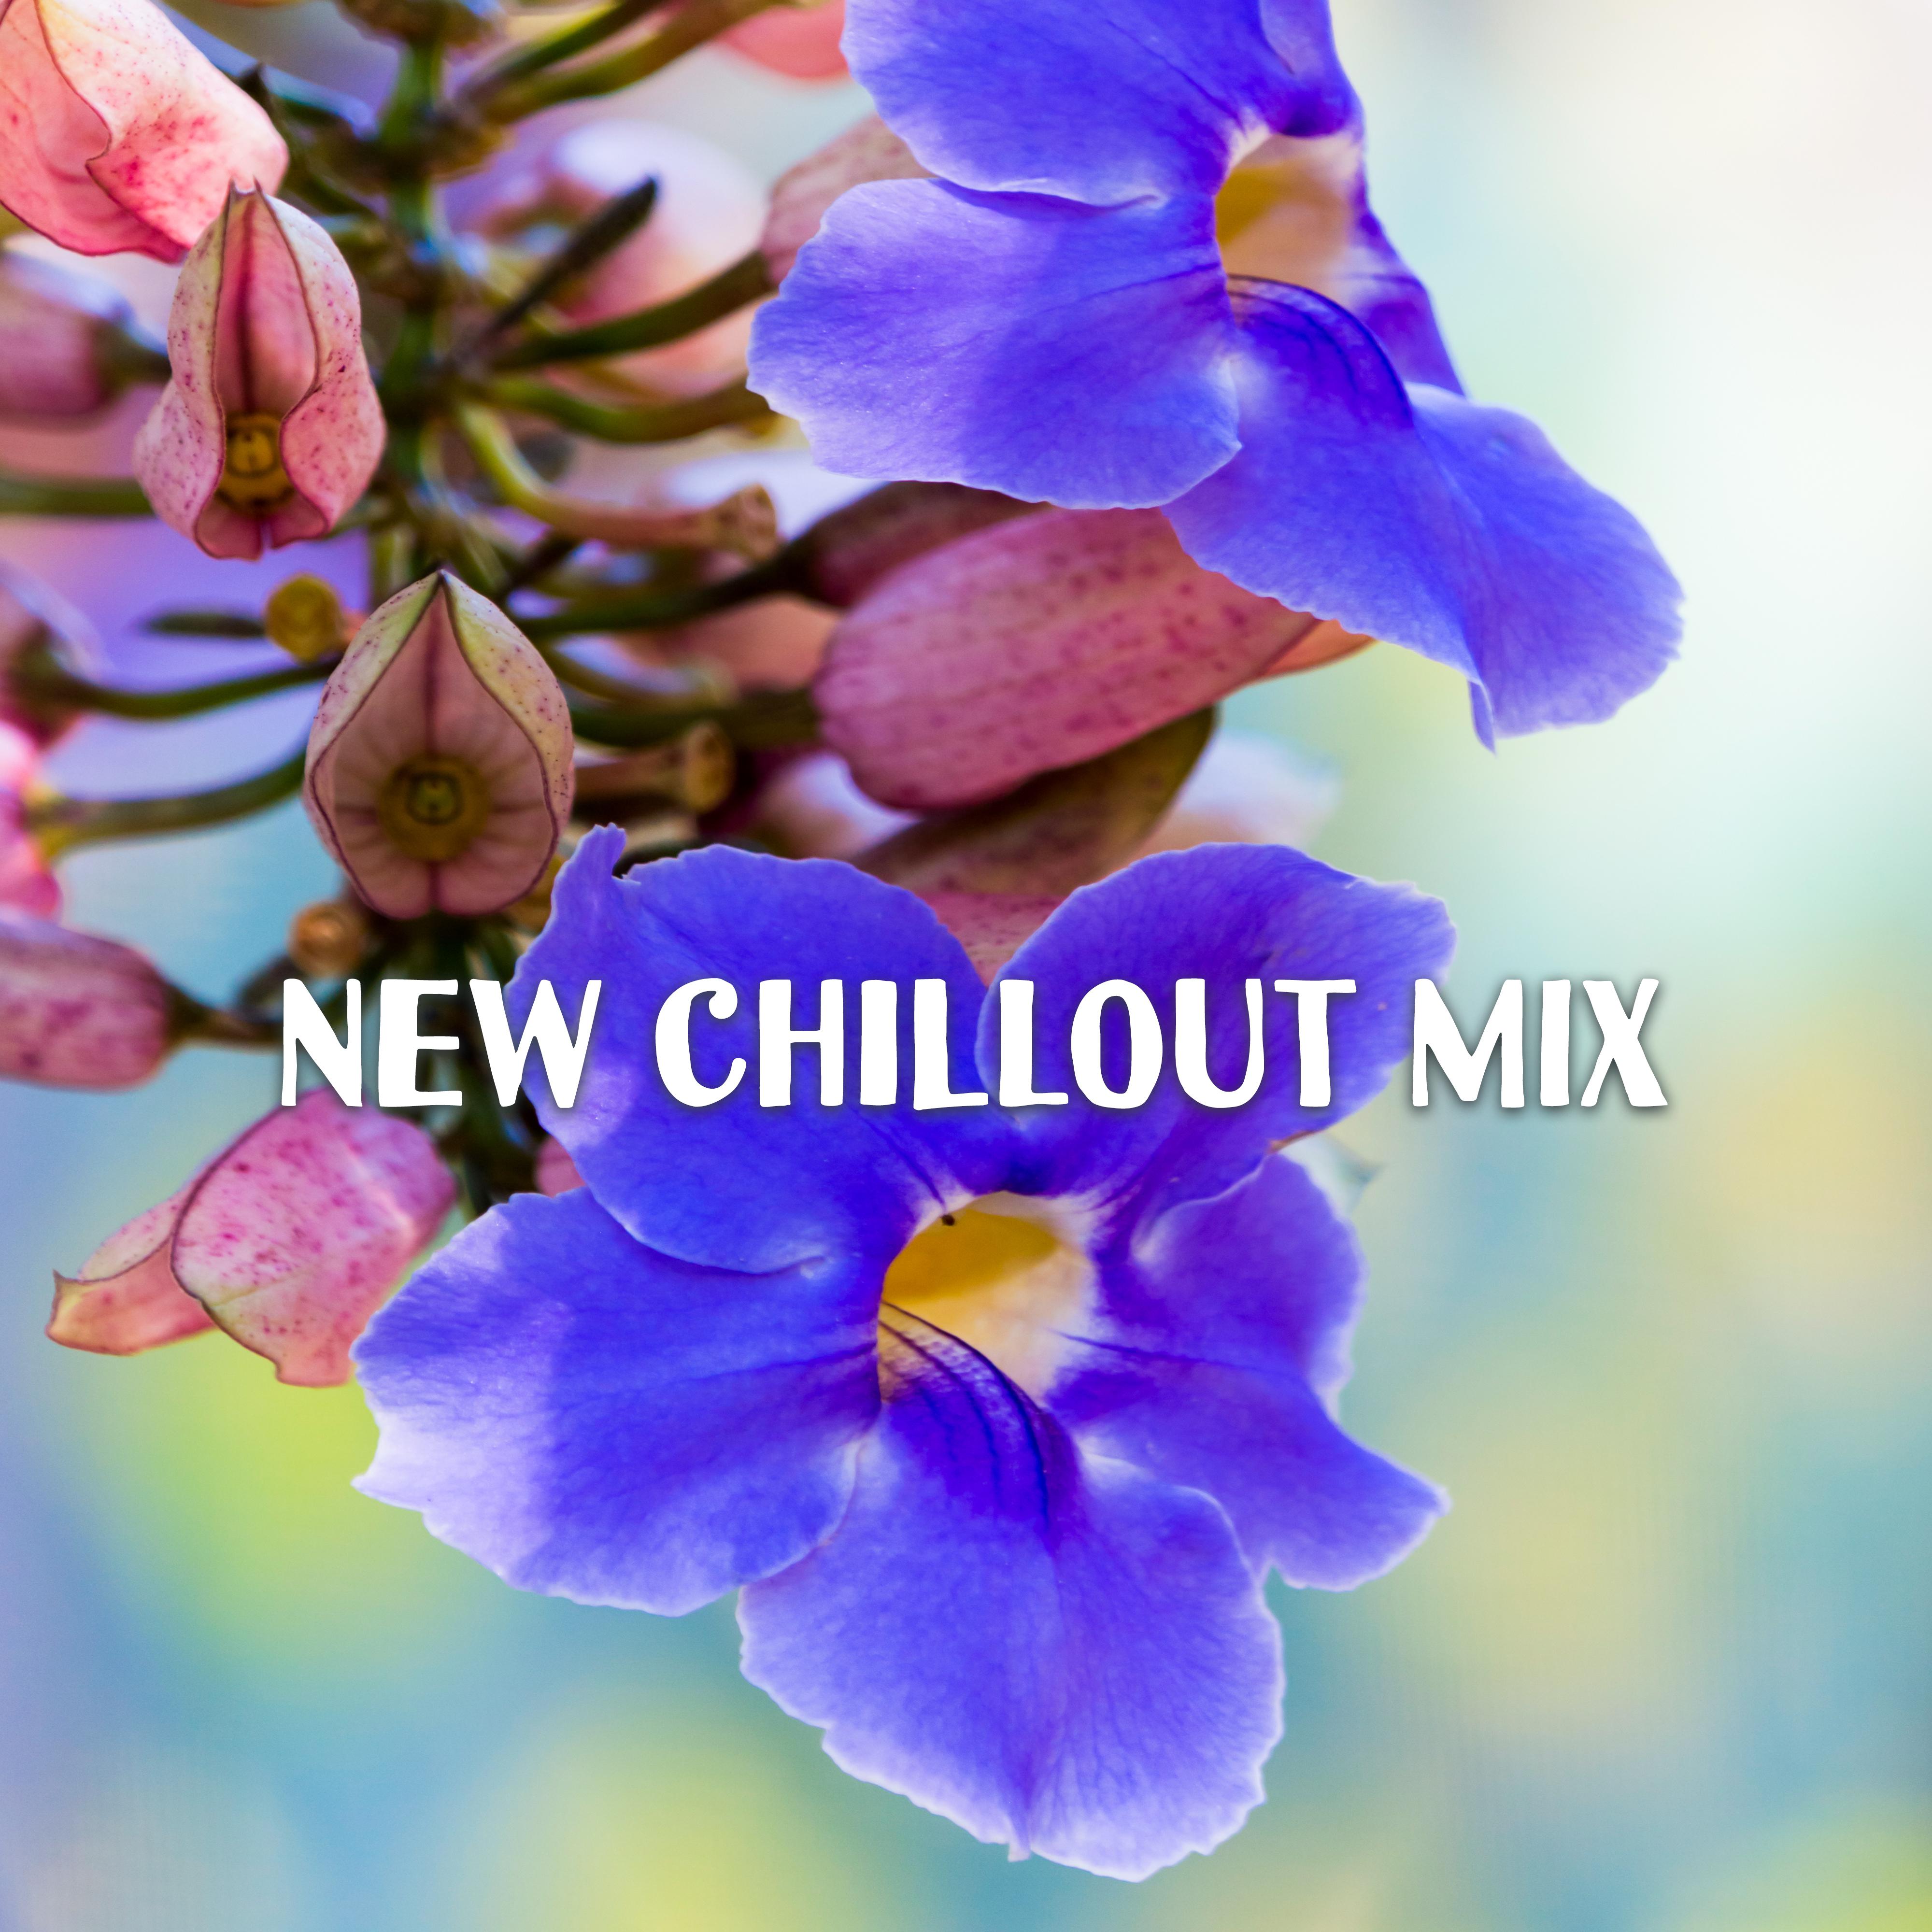 New Chillout Mix  Chillout Music , Deep Relaxation, Summertime Chill Out 2017, Party Hits Lounge